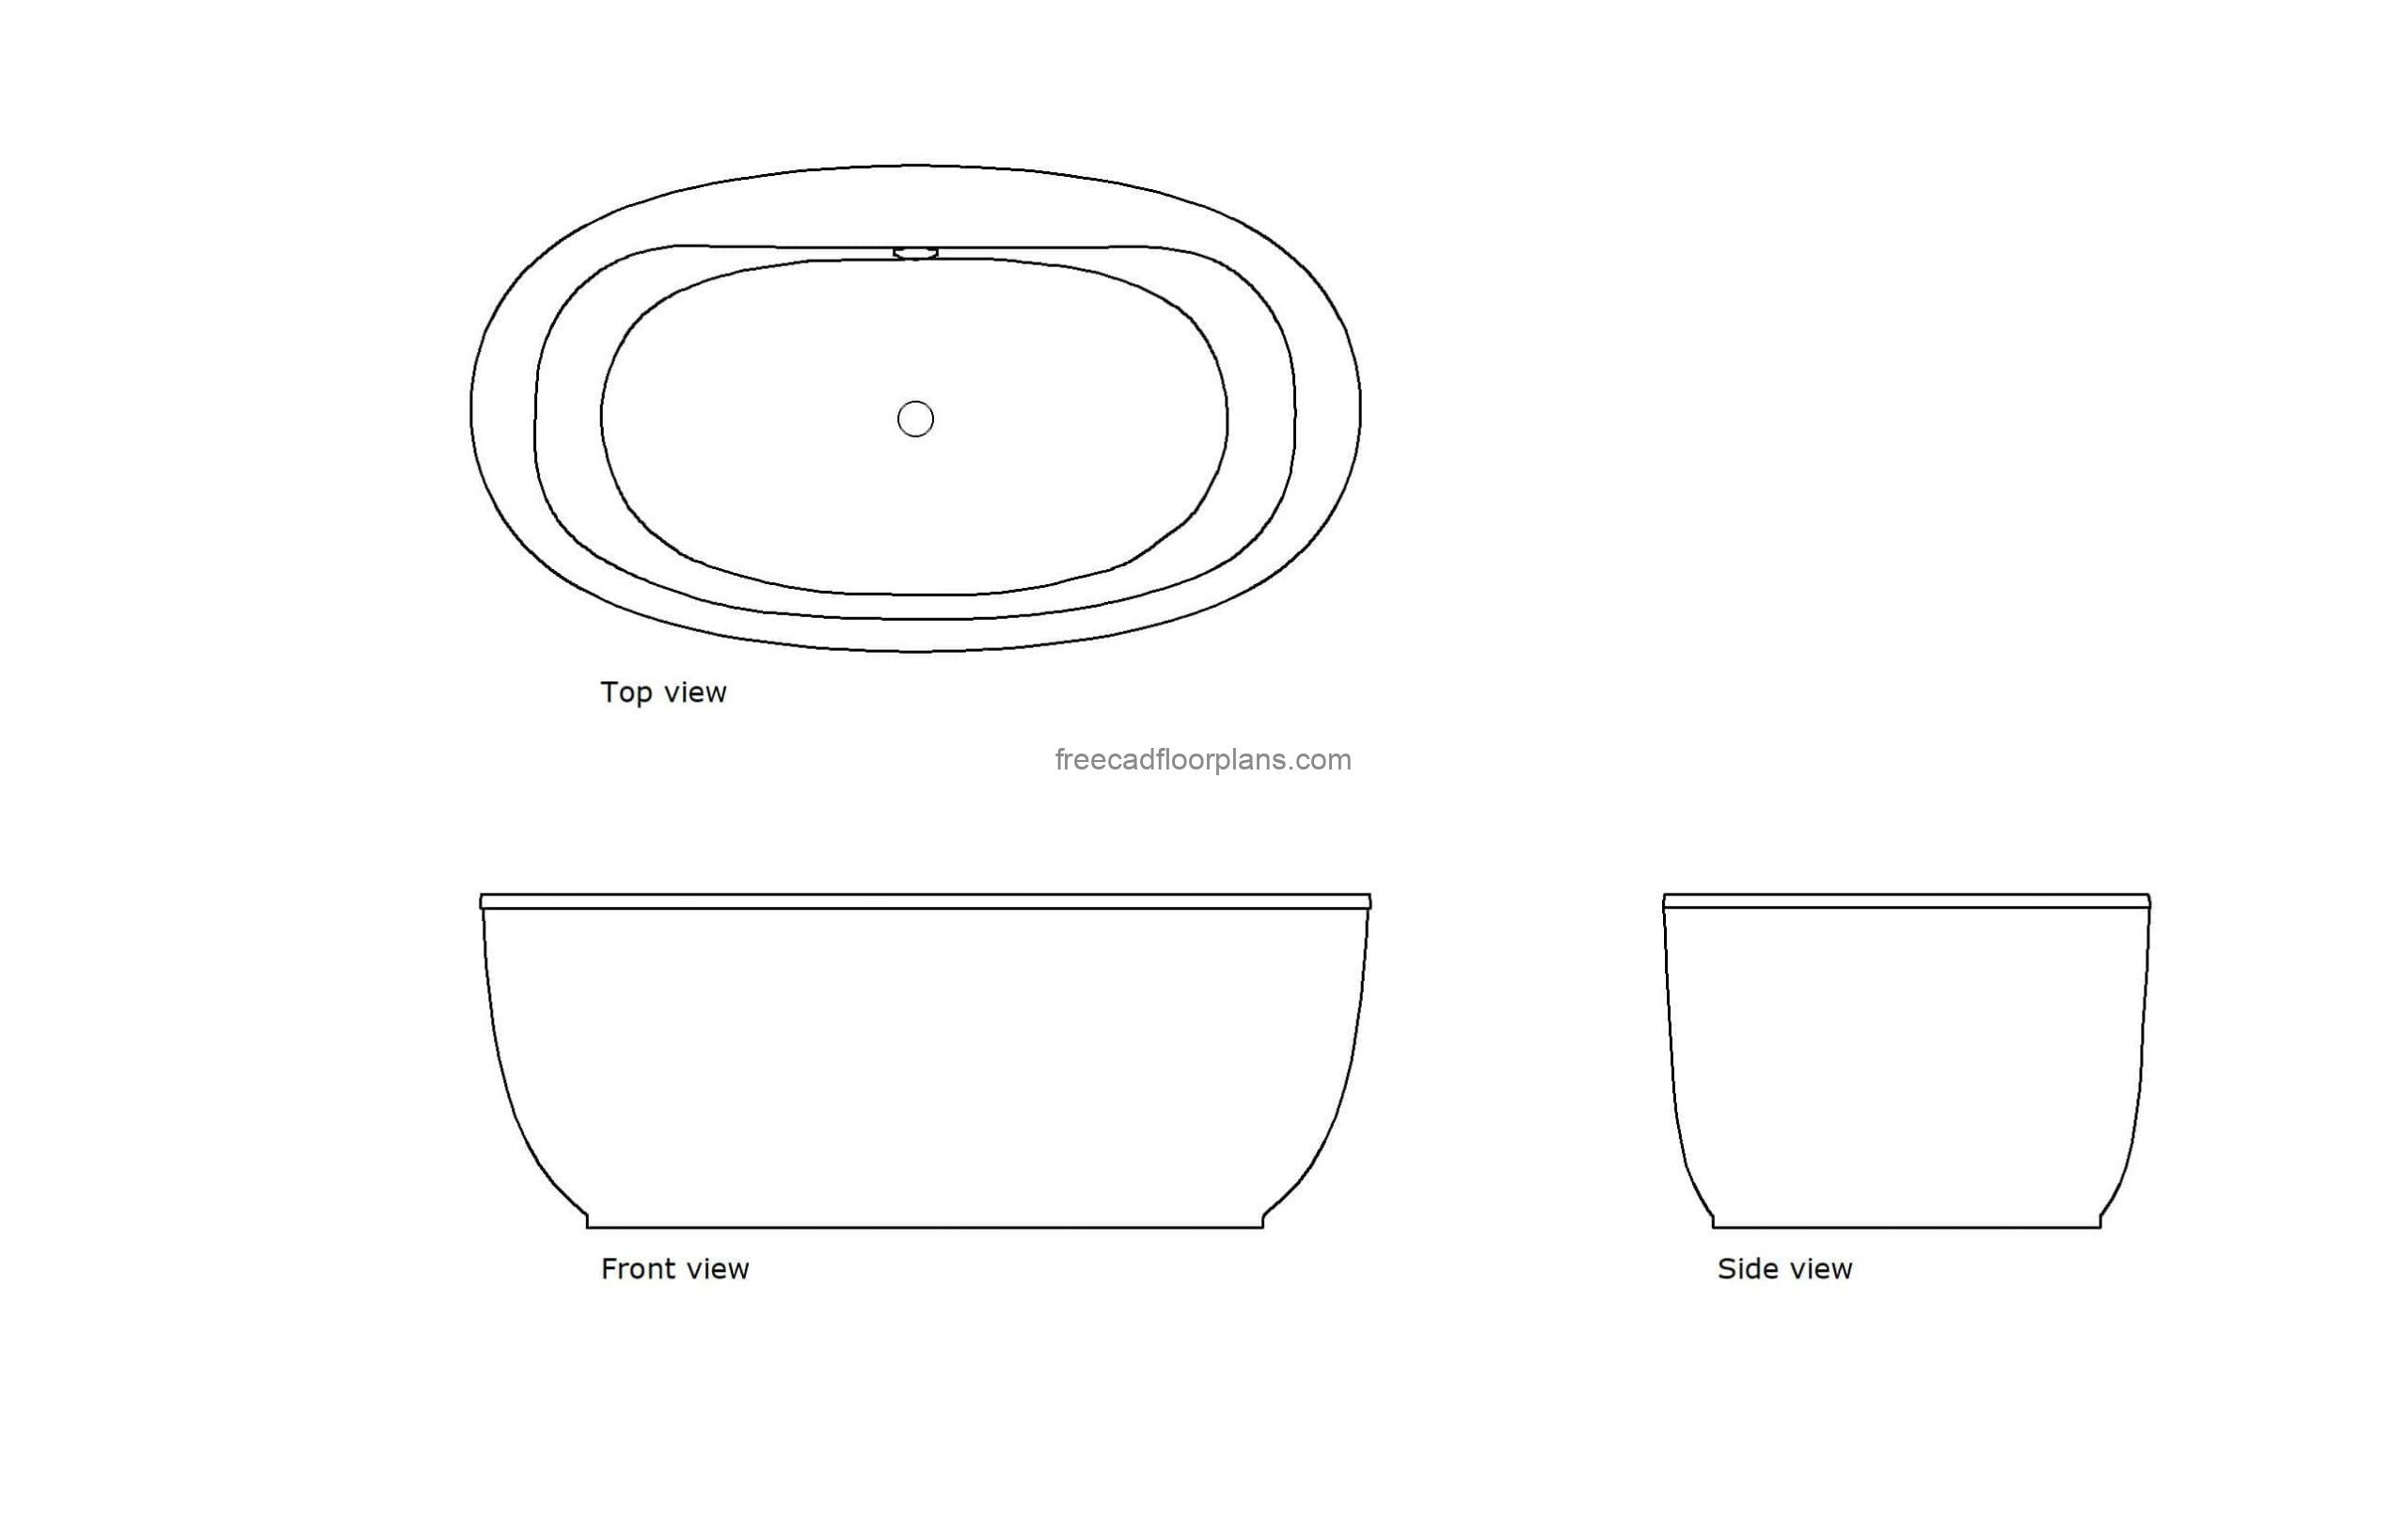 autocad drawing of a kohler freestanding tub, 2d views plan and elevation, dwg file for free download